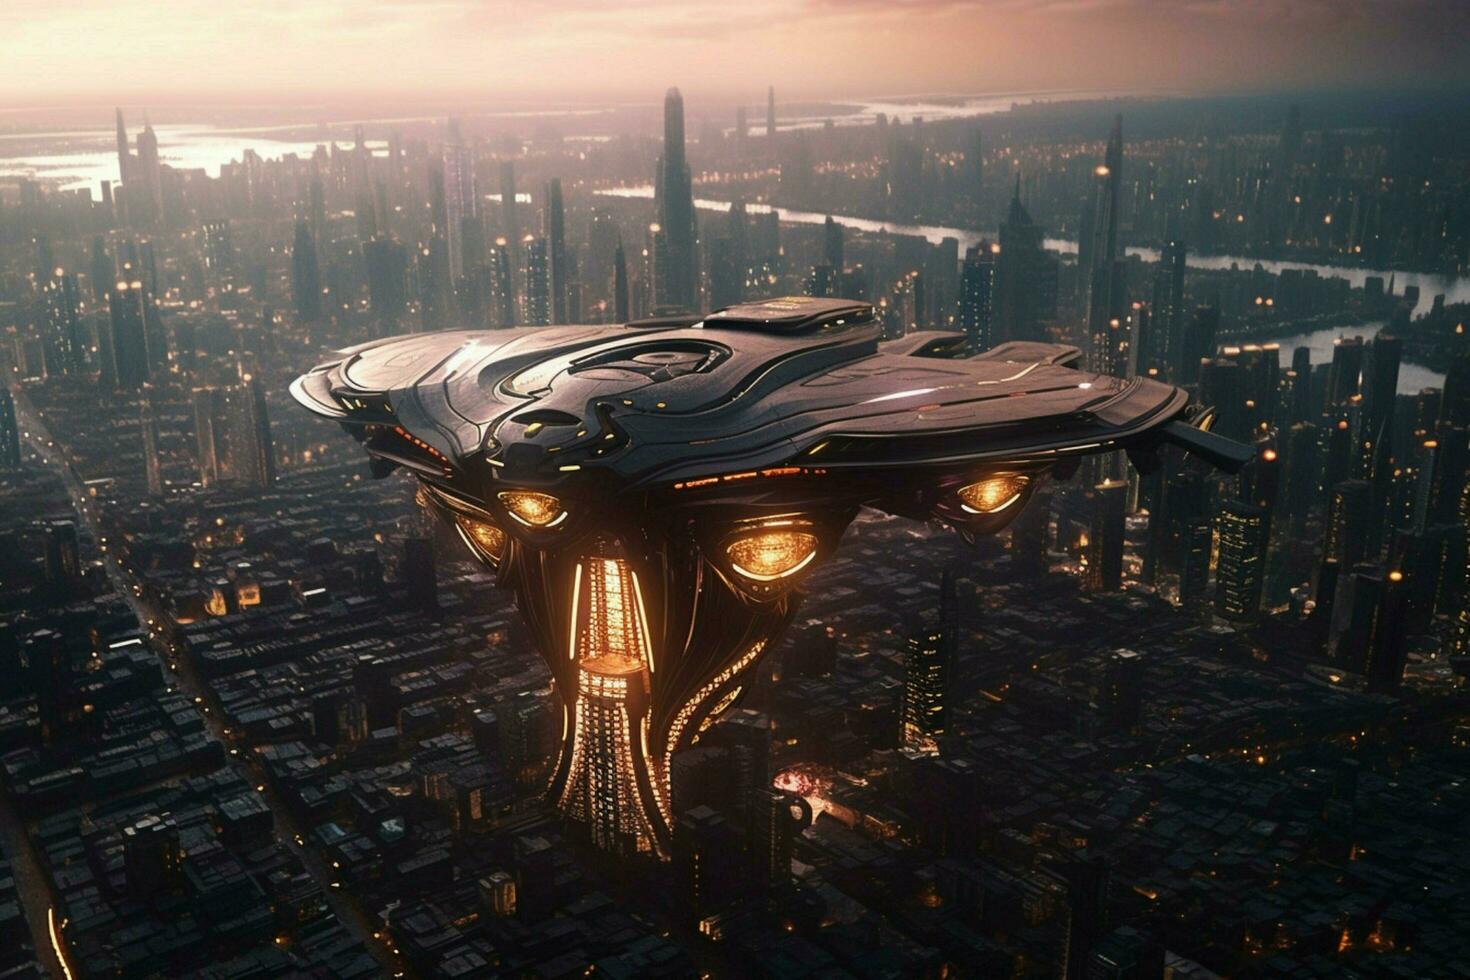 A futuristic spaceship hovering over a city photo